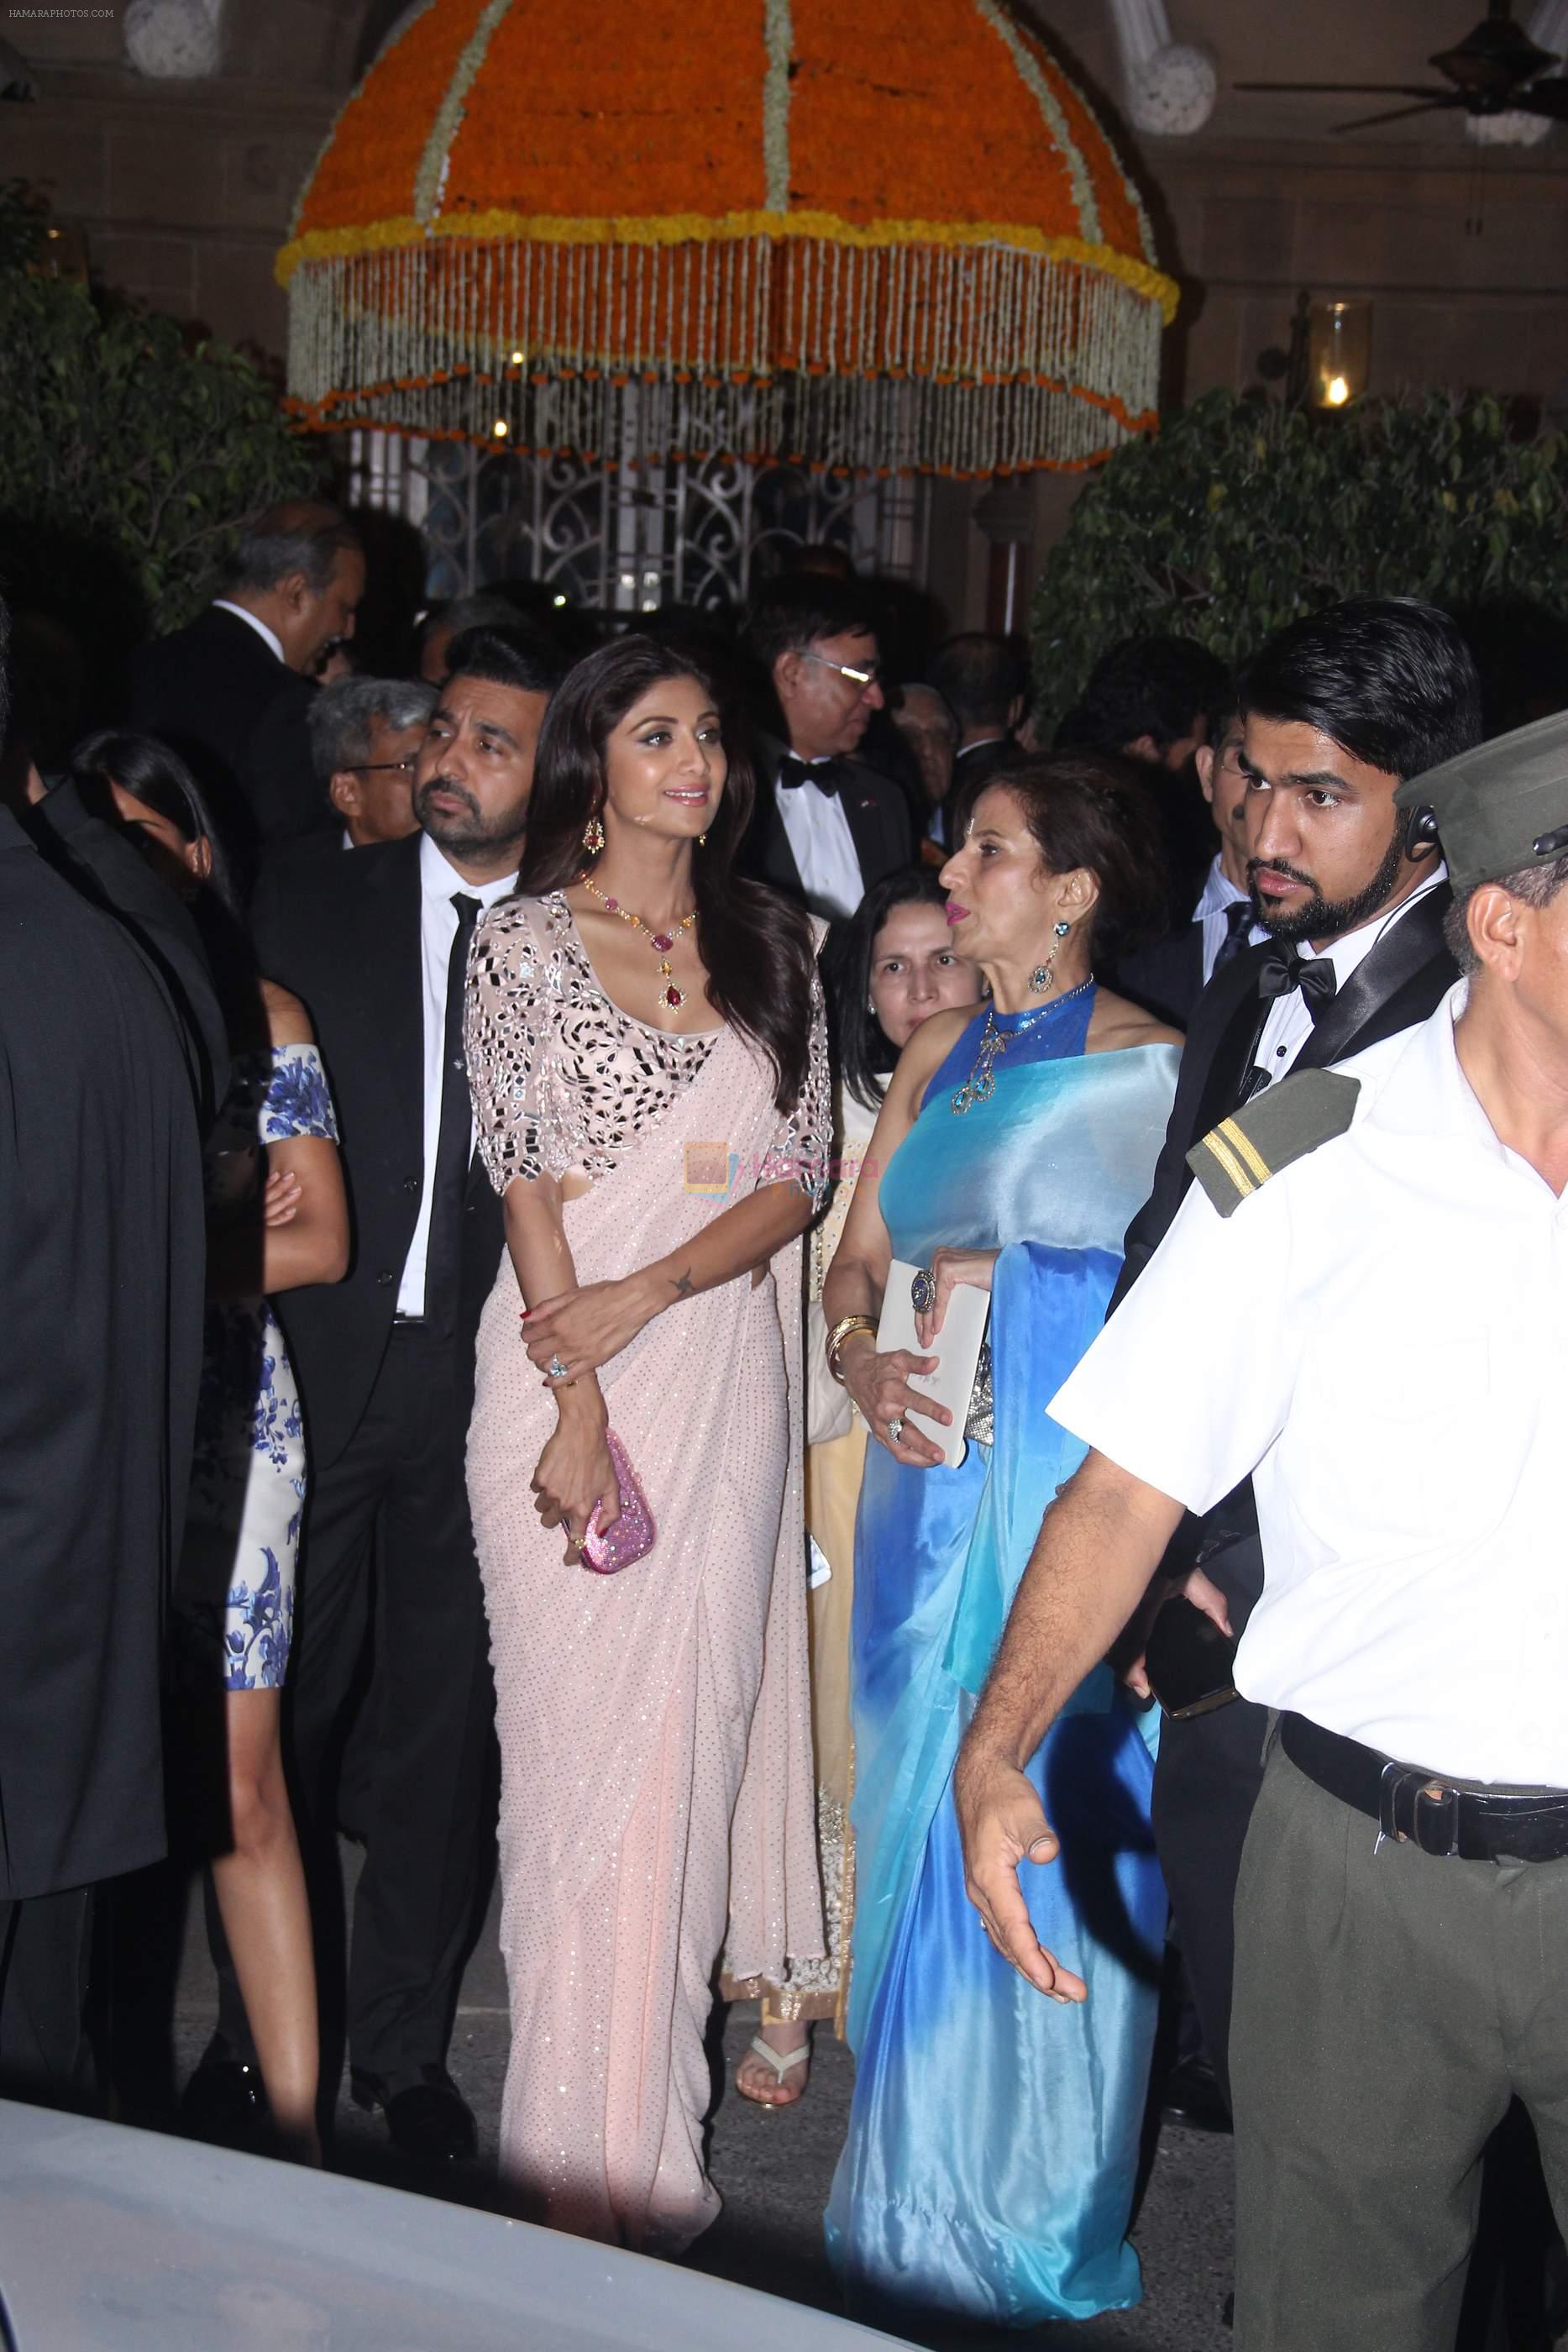 Shilpa Shetty at the Royal dinner by Prince William & Kate Middleton on 10th April 2016